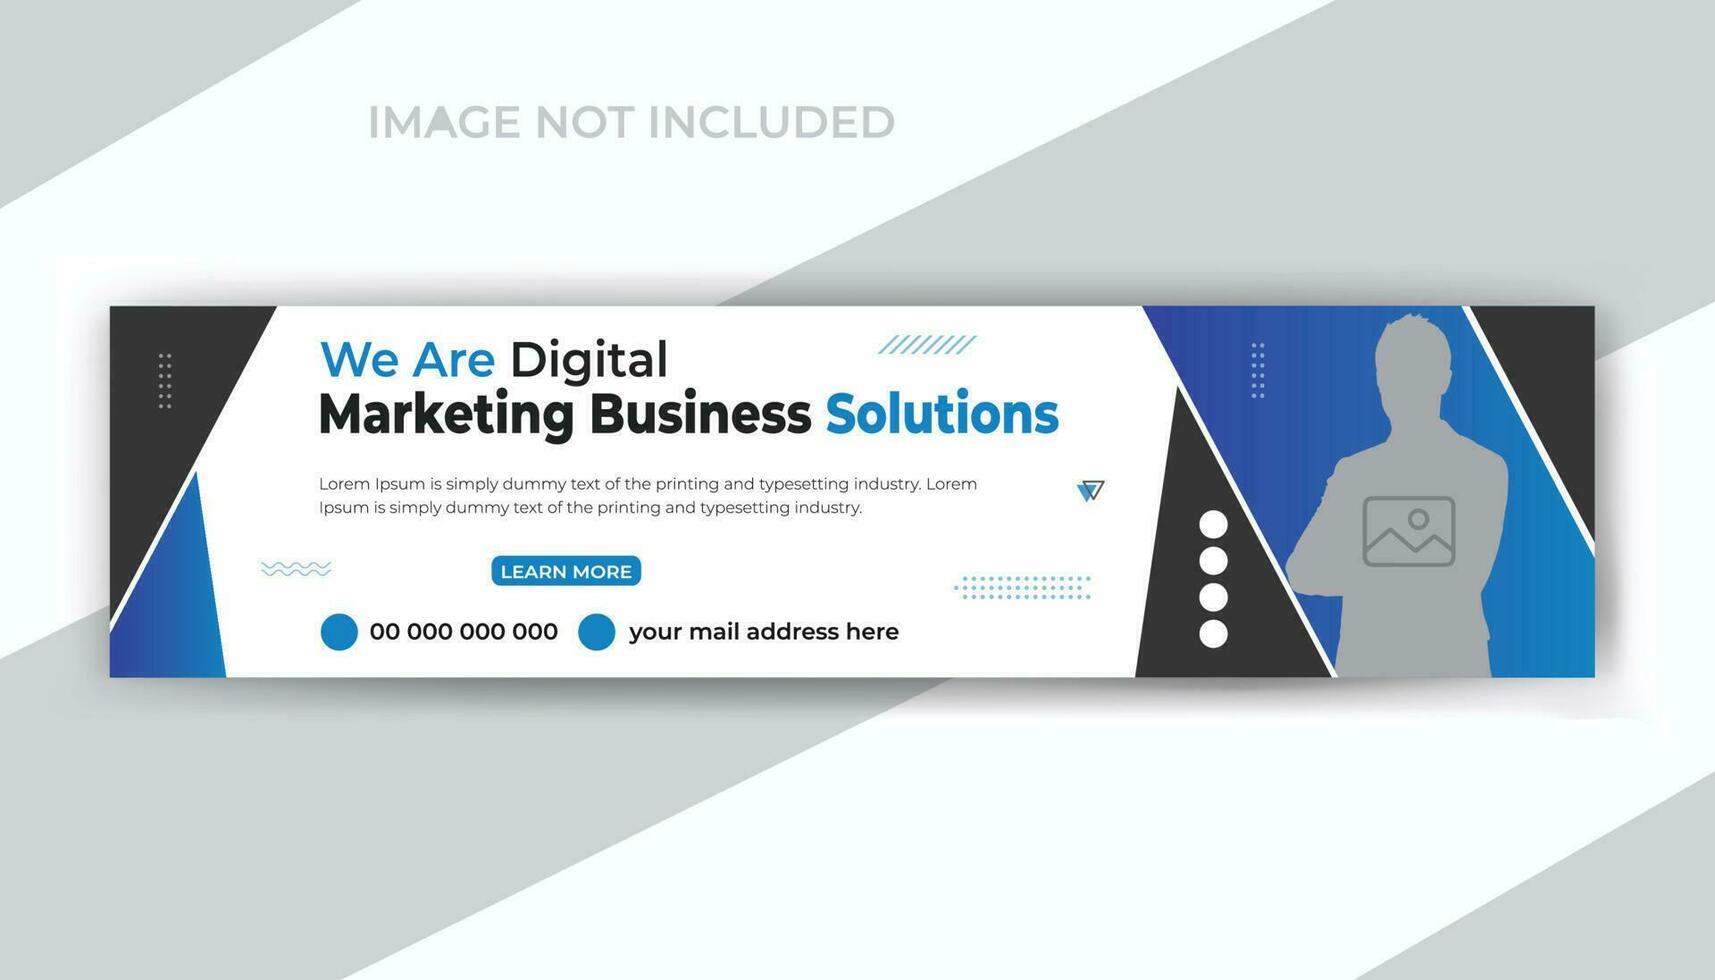 Corporate business company and digital marketing agency social media timeline cover or web banner template vector